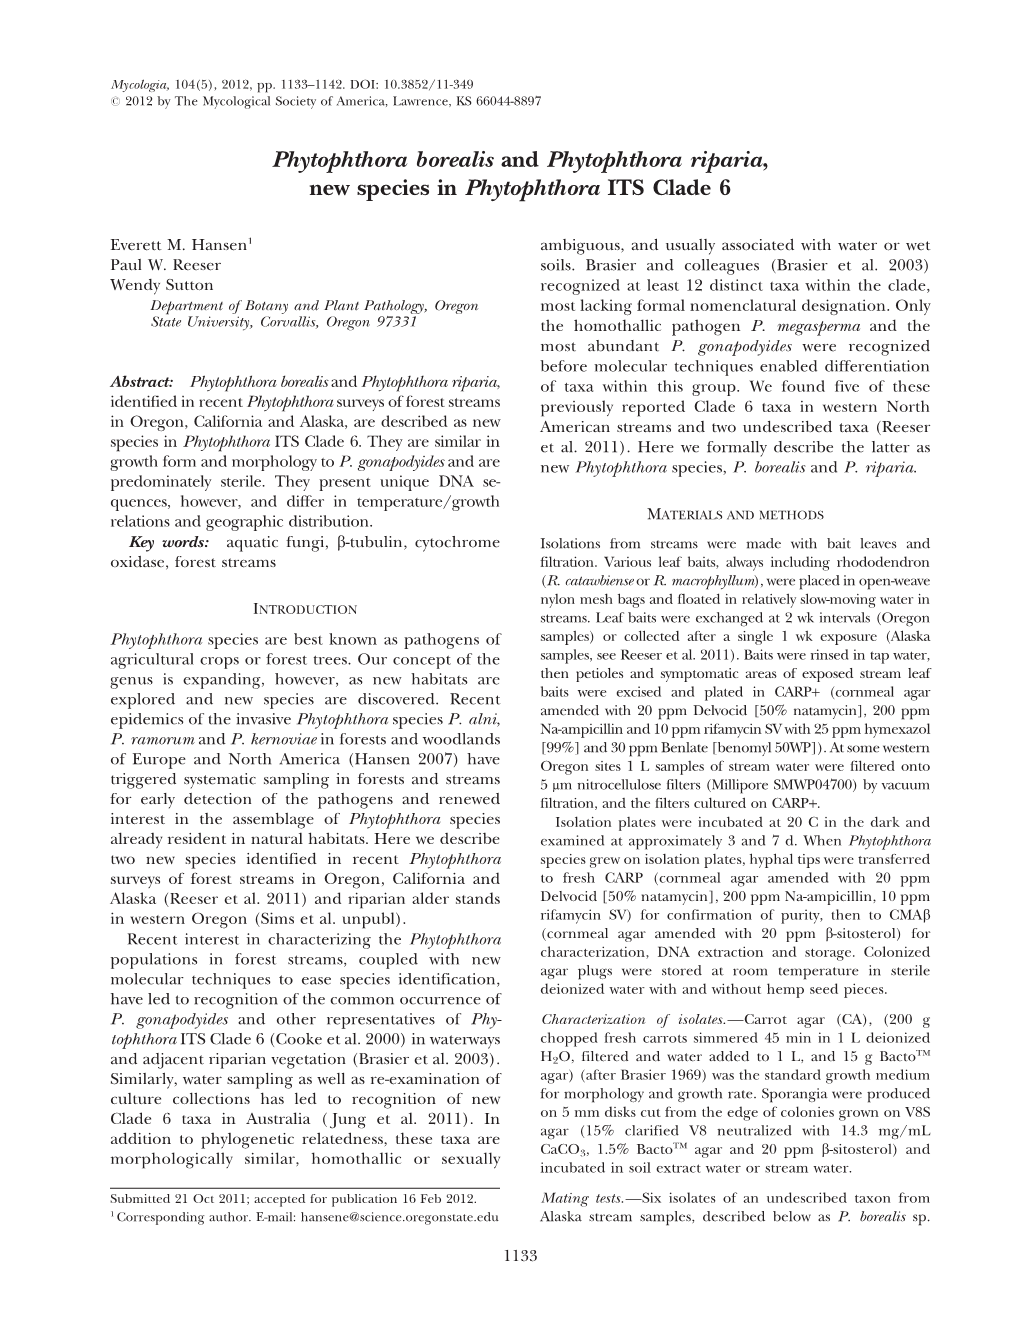 Phytophthora Borealis and Phytophthora Riparia, New Species in Phytophthora ITS Clade 6